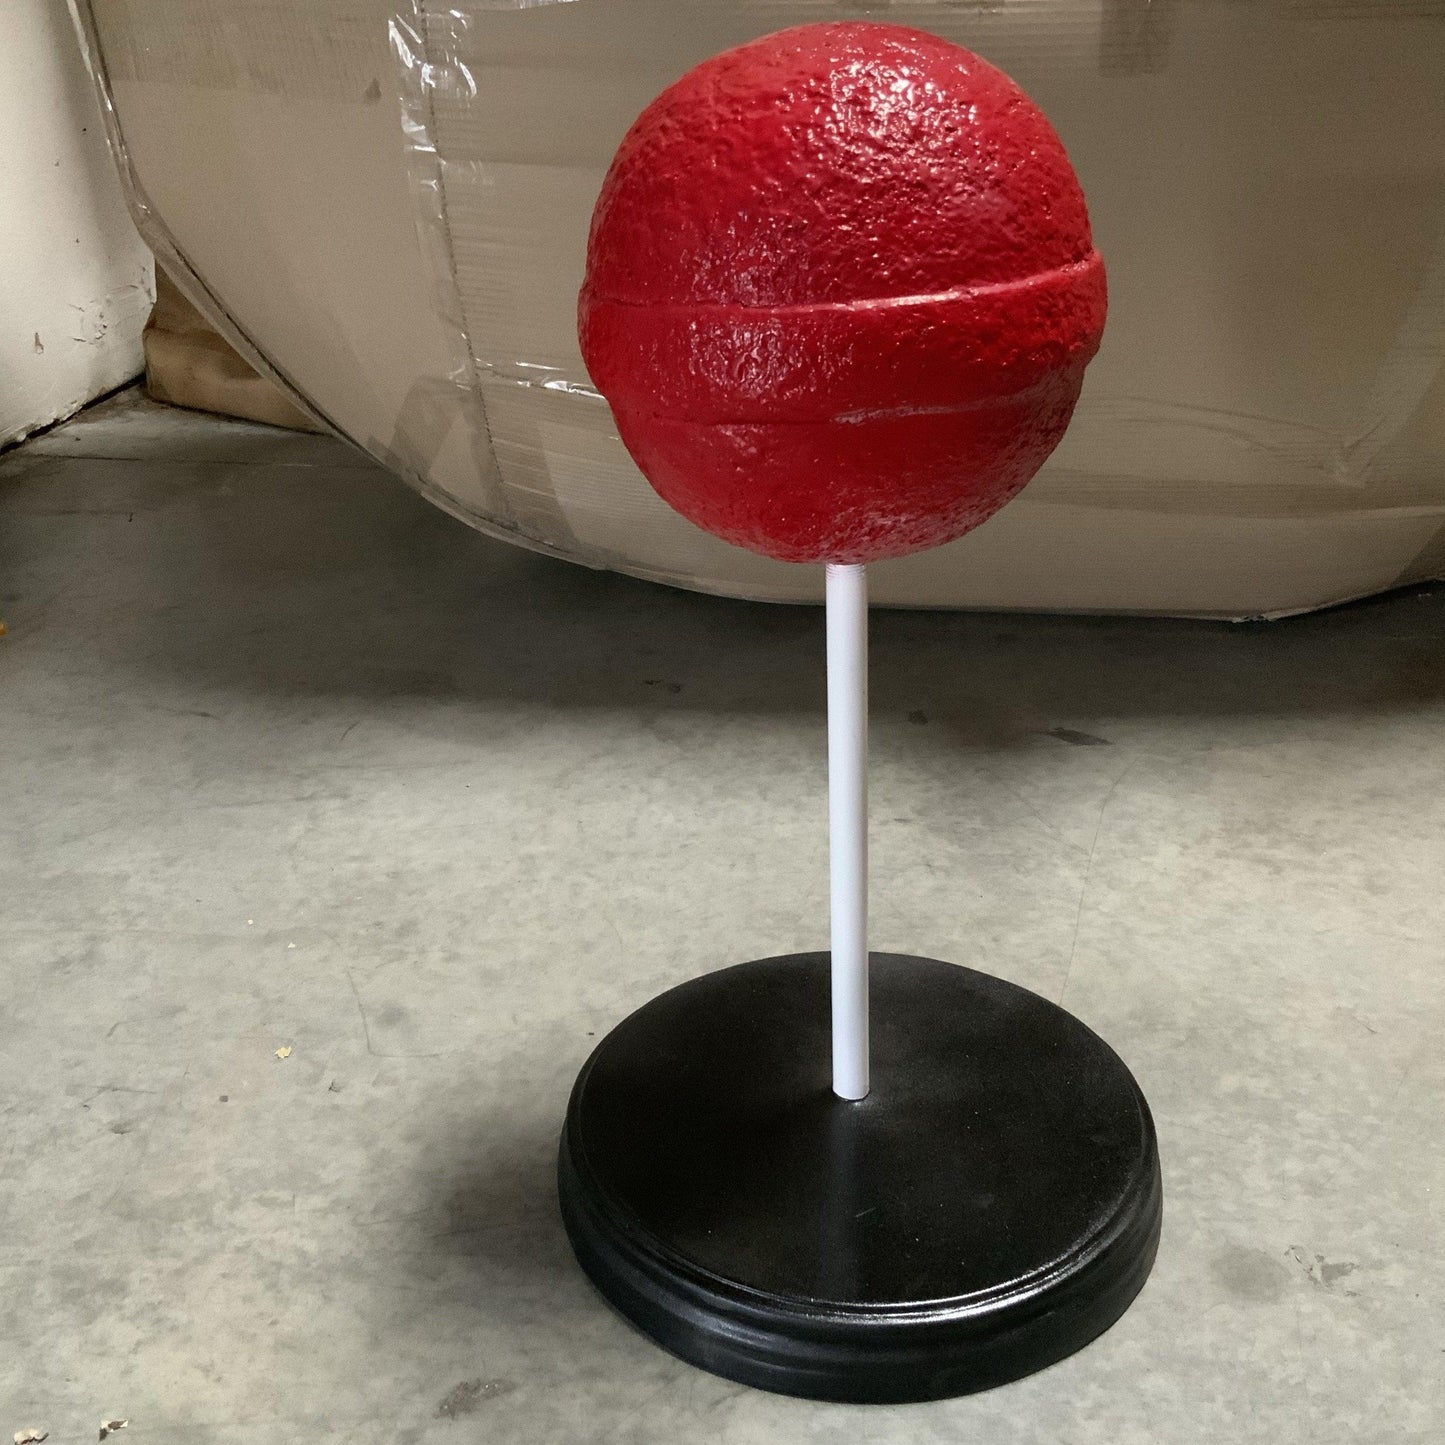 Small Red Sugar Pop Over Sized Statue - LM Treasures Prop Rentals 